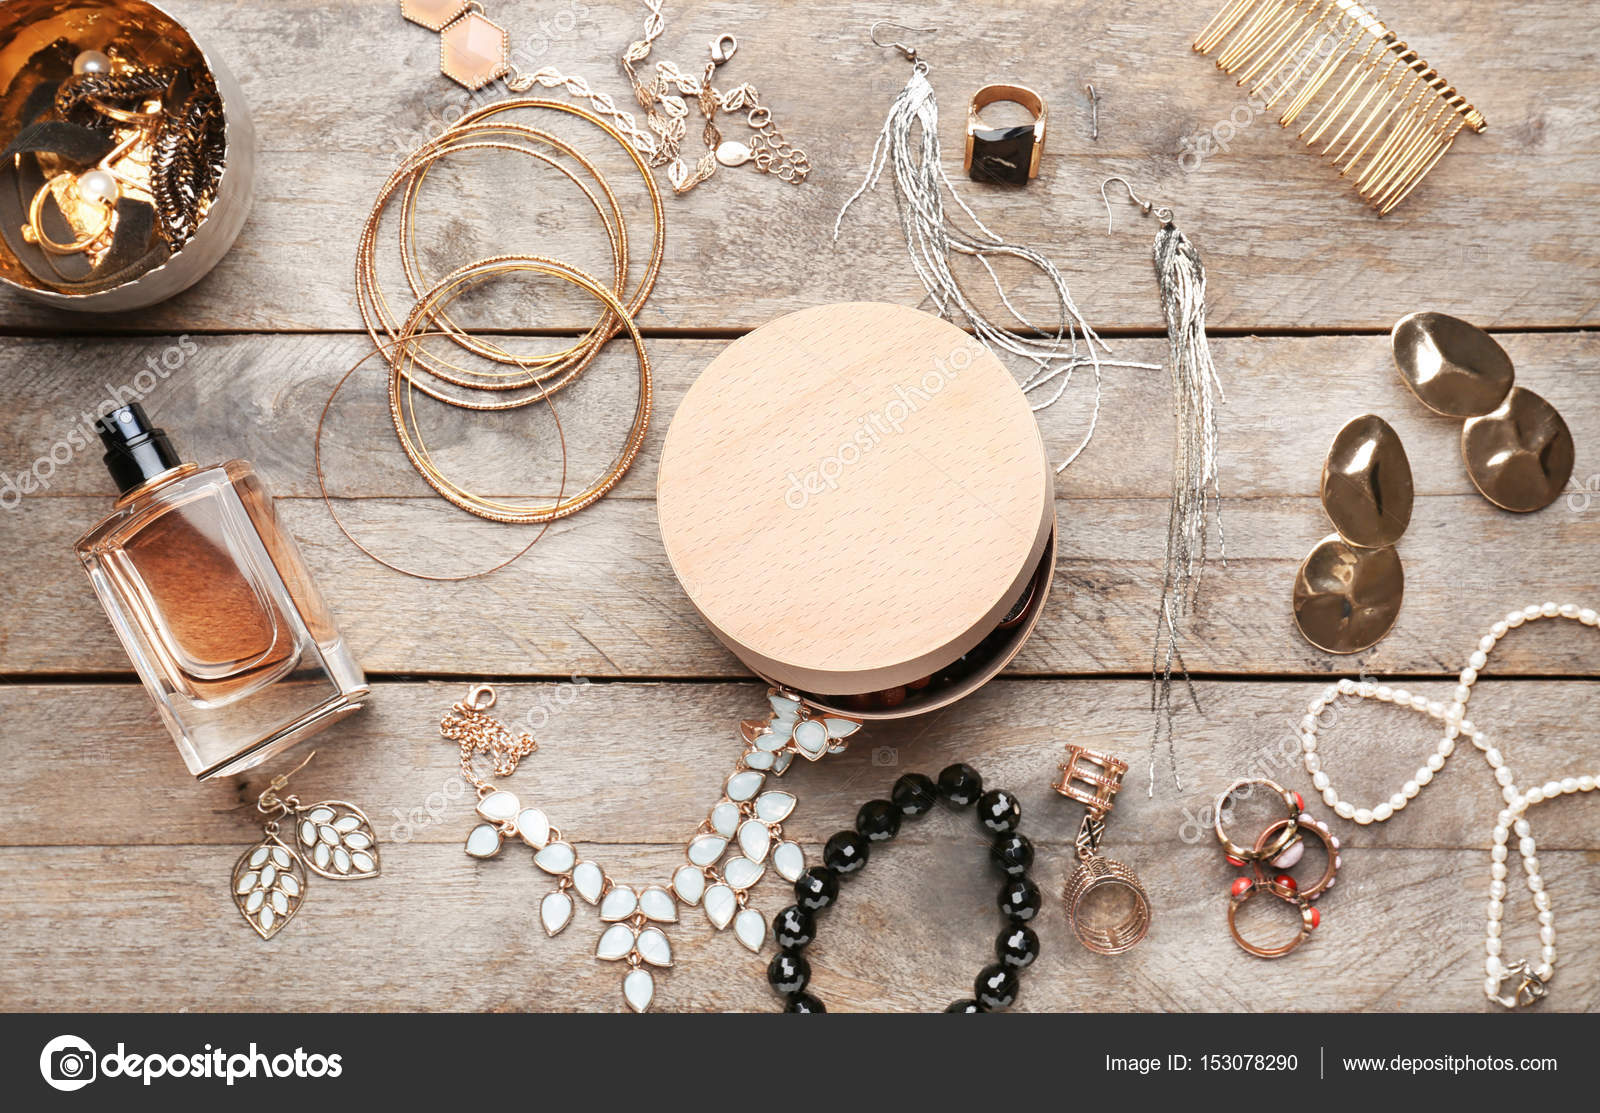 Jewelry accessories in box Stock Photo by ©belchonock 153074986